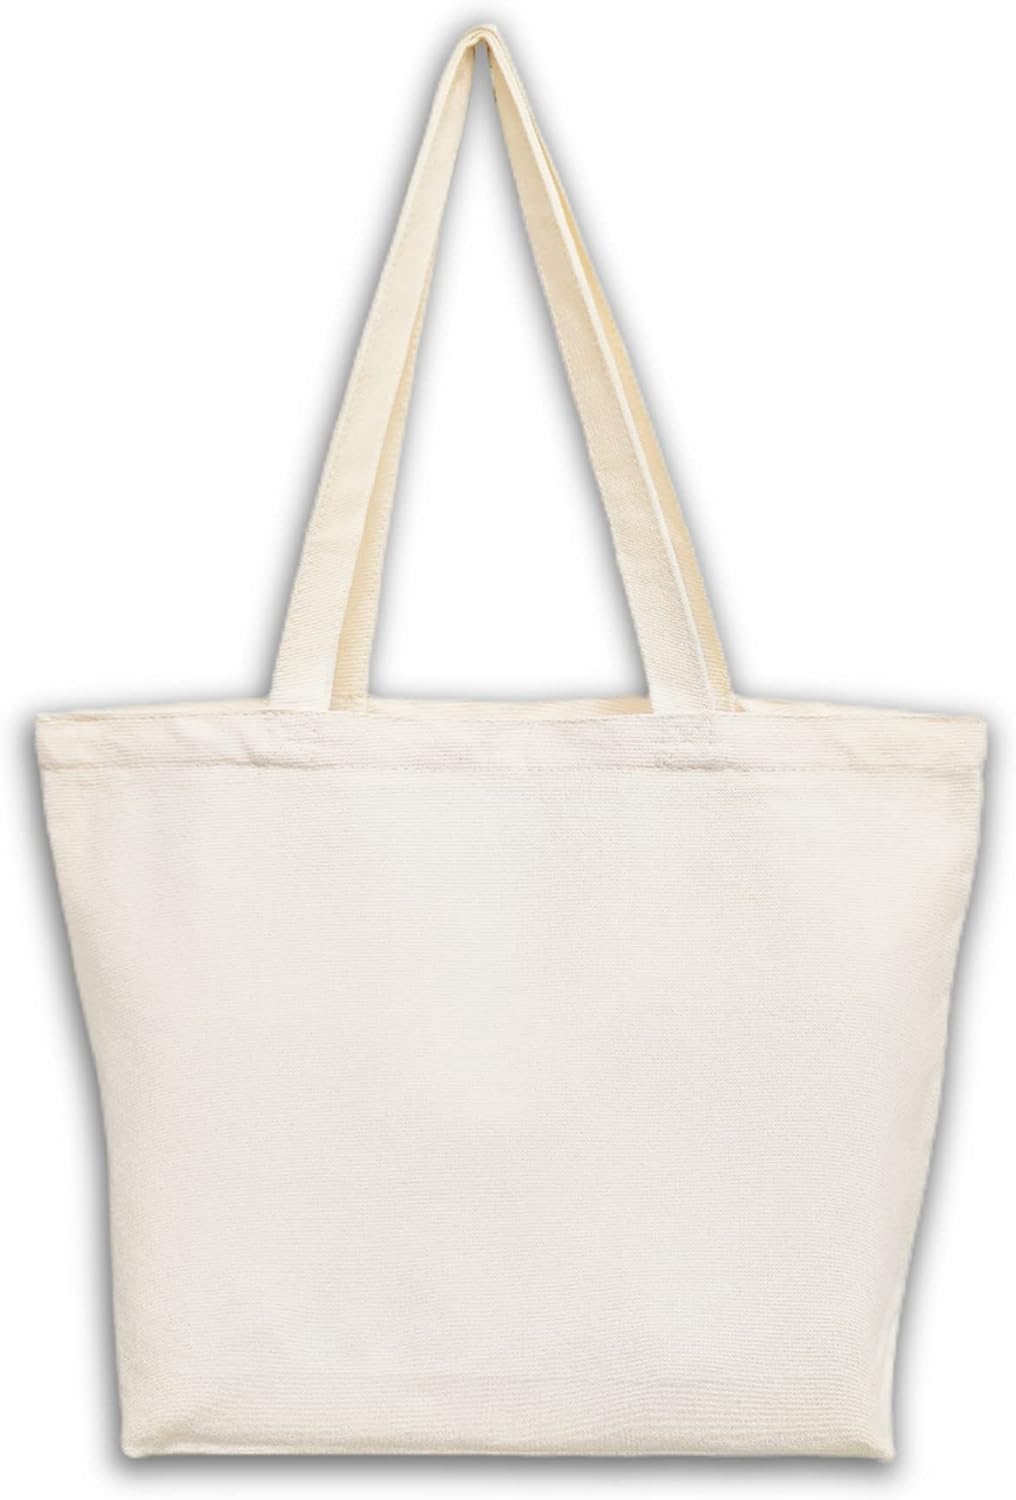 Canvas Tote Bag, Pockets, Zipper, Durable, Lightweight, Cotton Shopping Cloth Bag, Gifts